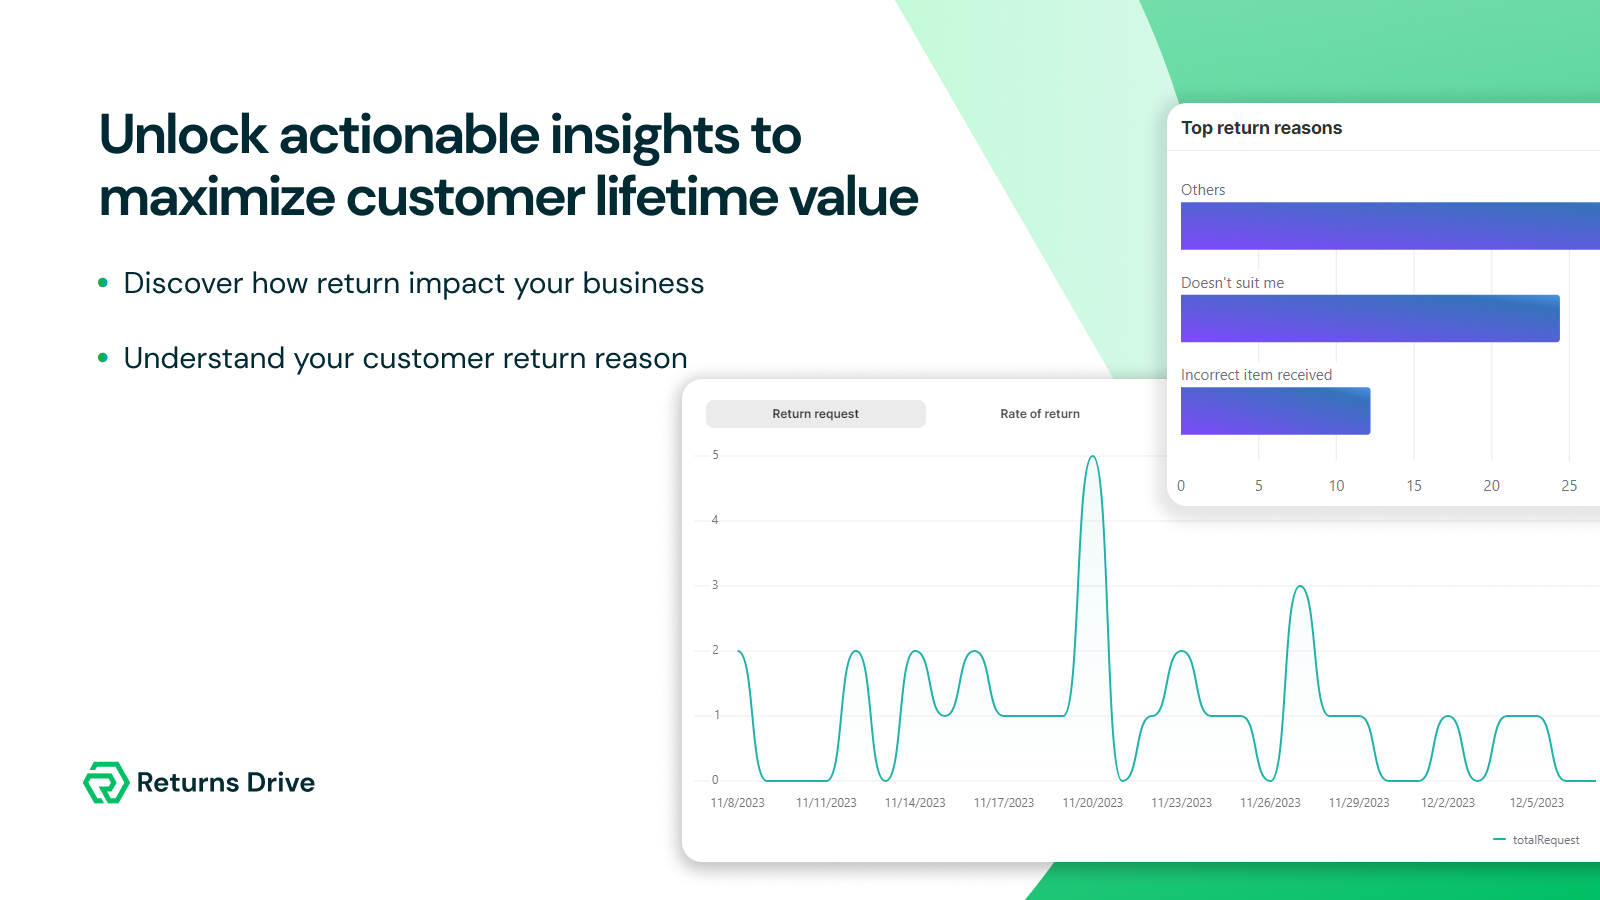 Analytics dashboard: explore returns reason and valued insights 